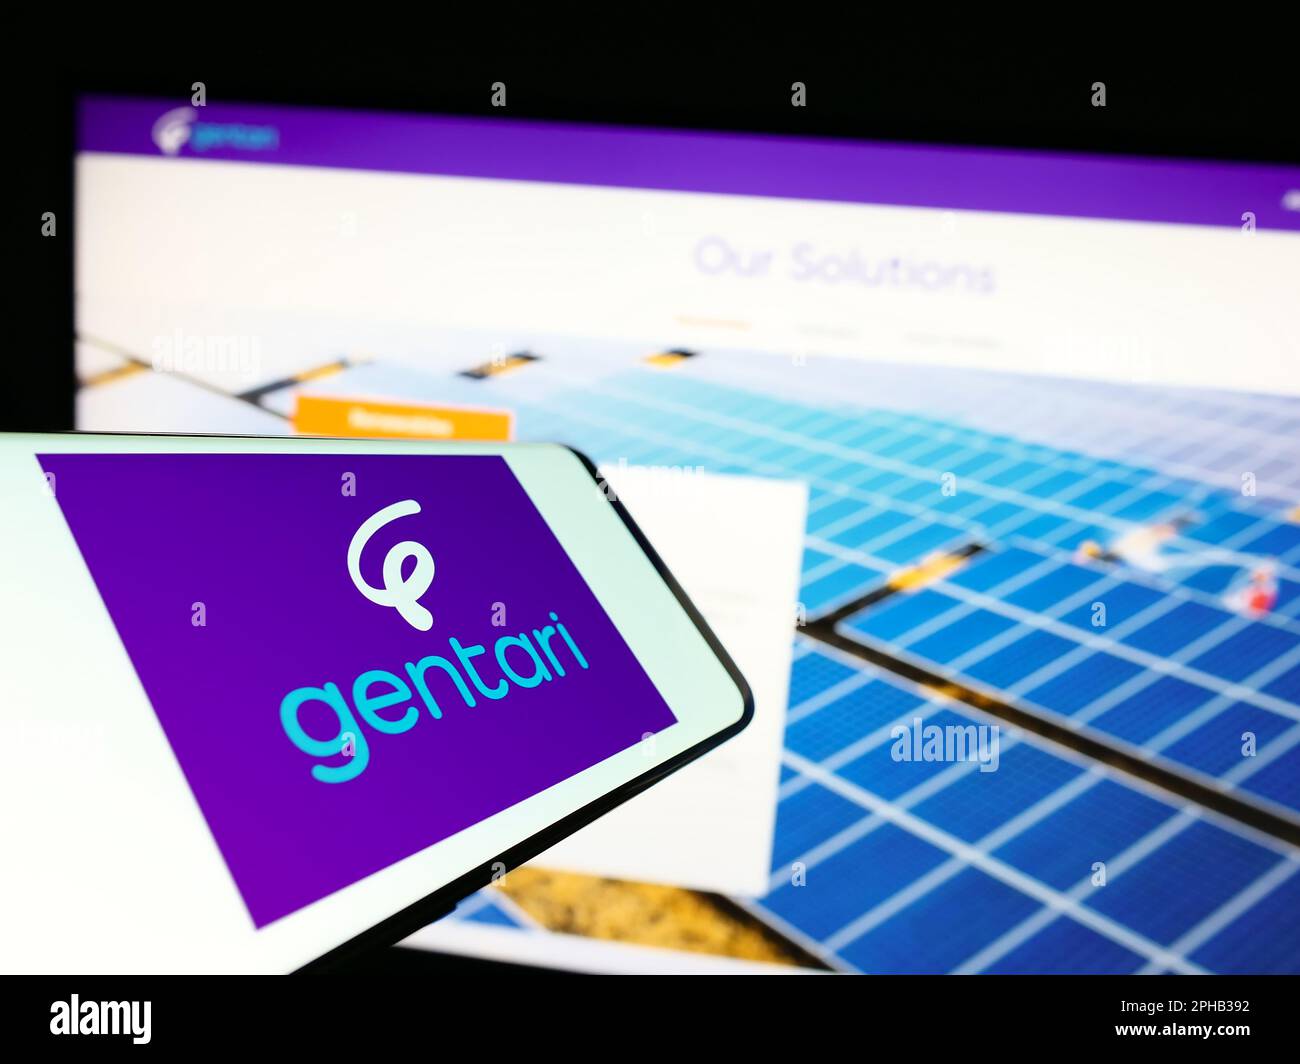 Mobile phone with logo of Malaysian energy company Gentari Sdn. Bhd. on screen in front of website. Focus on center-right of phone display. Stock Photo